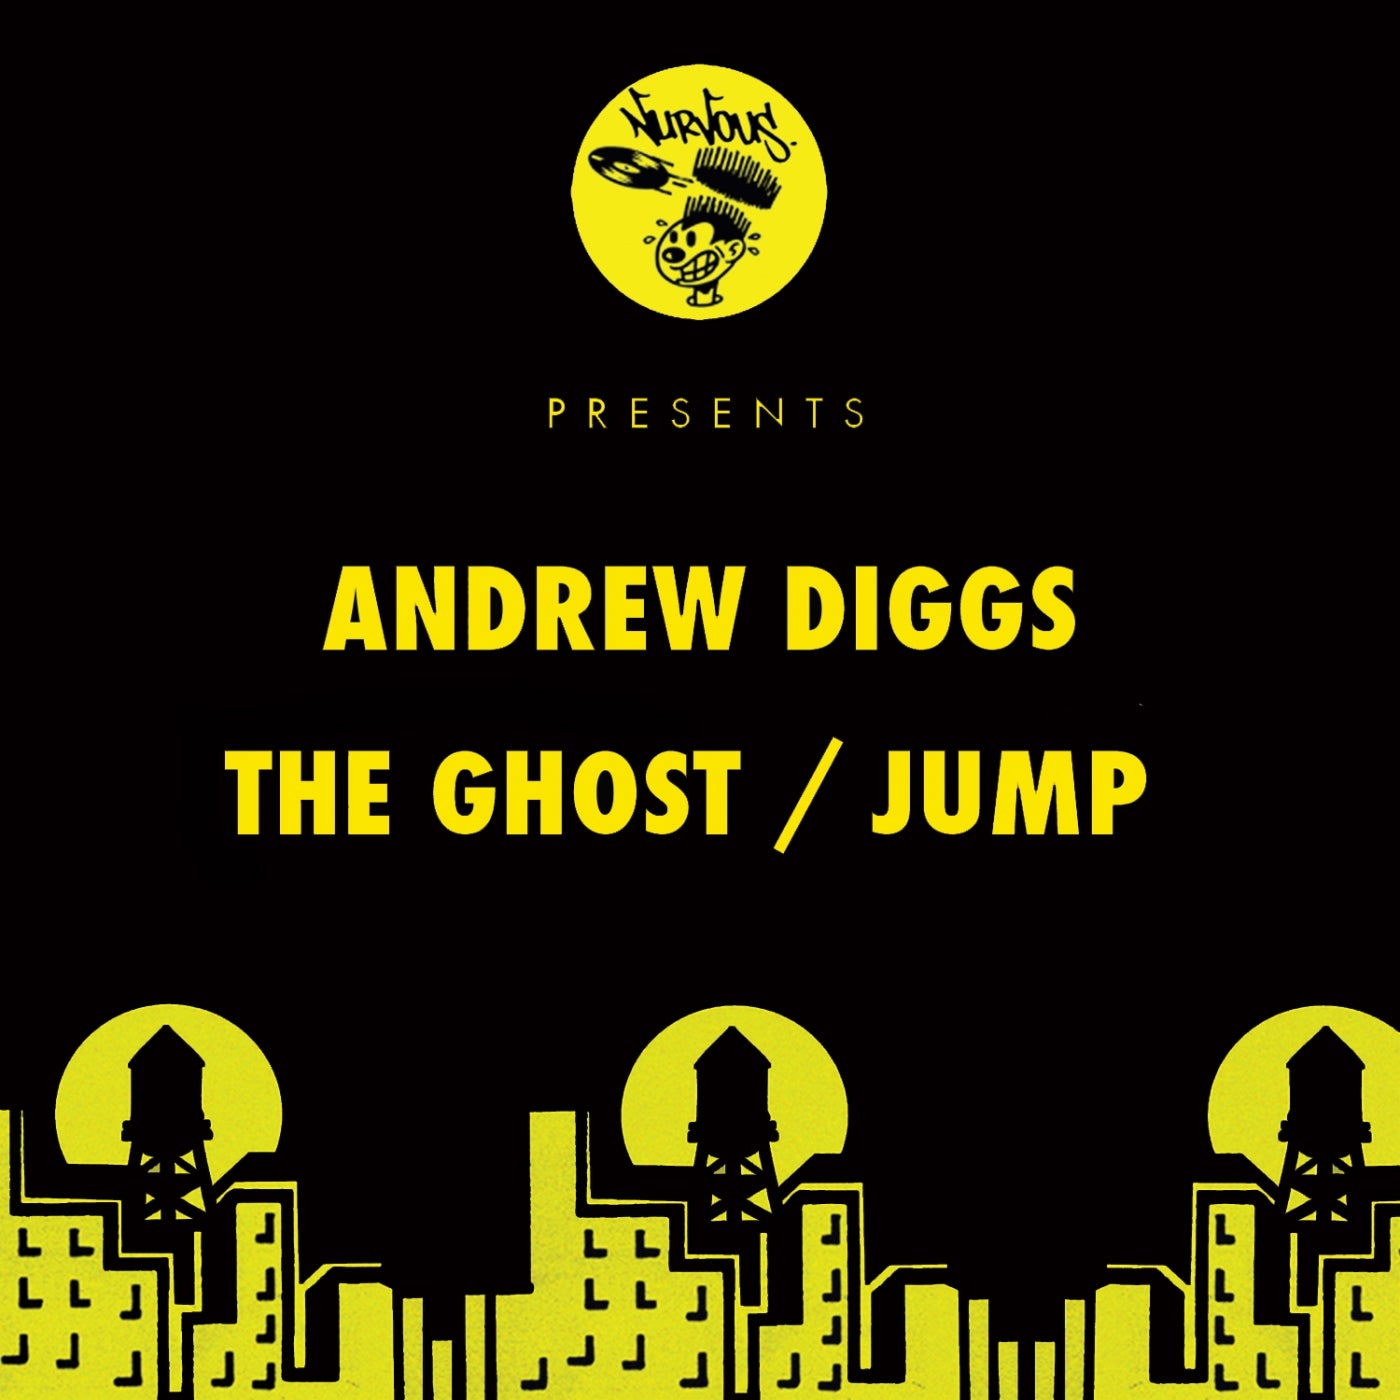 The Ghost / Jump